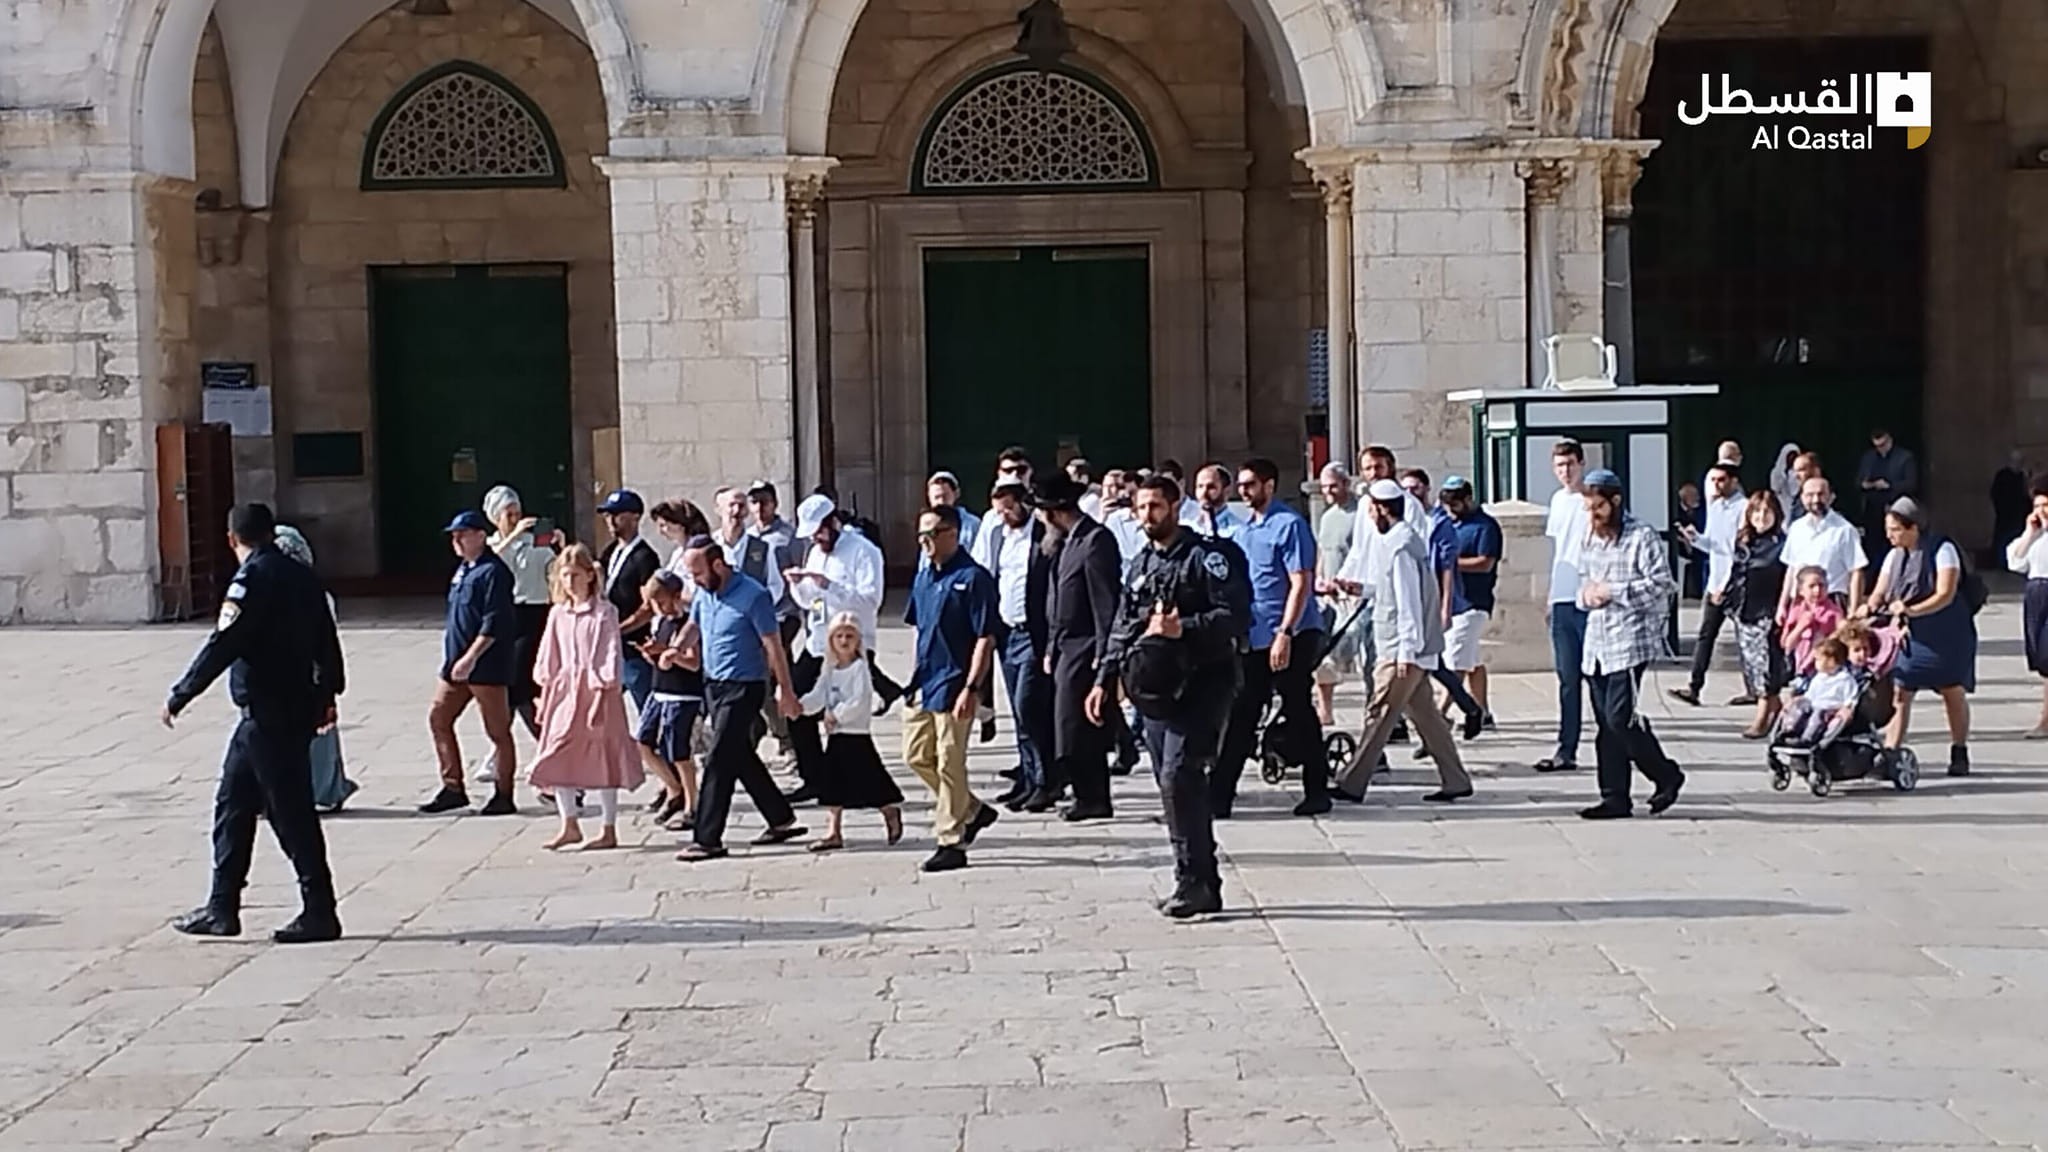 Hundreds of settlers, including ministers and Knesset members, storm Al-Aqsa Mosque